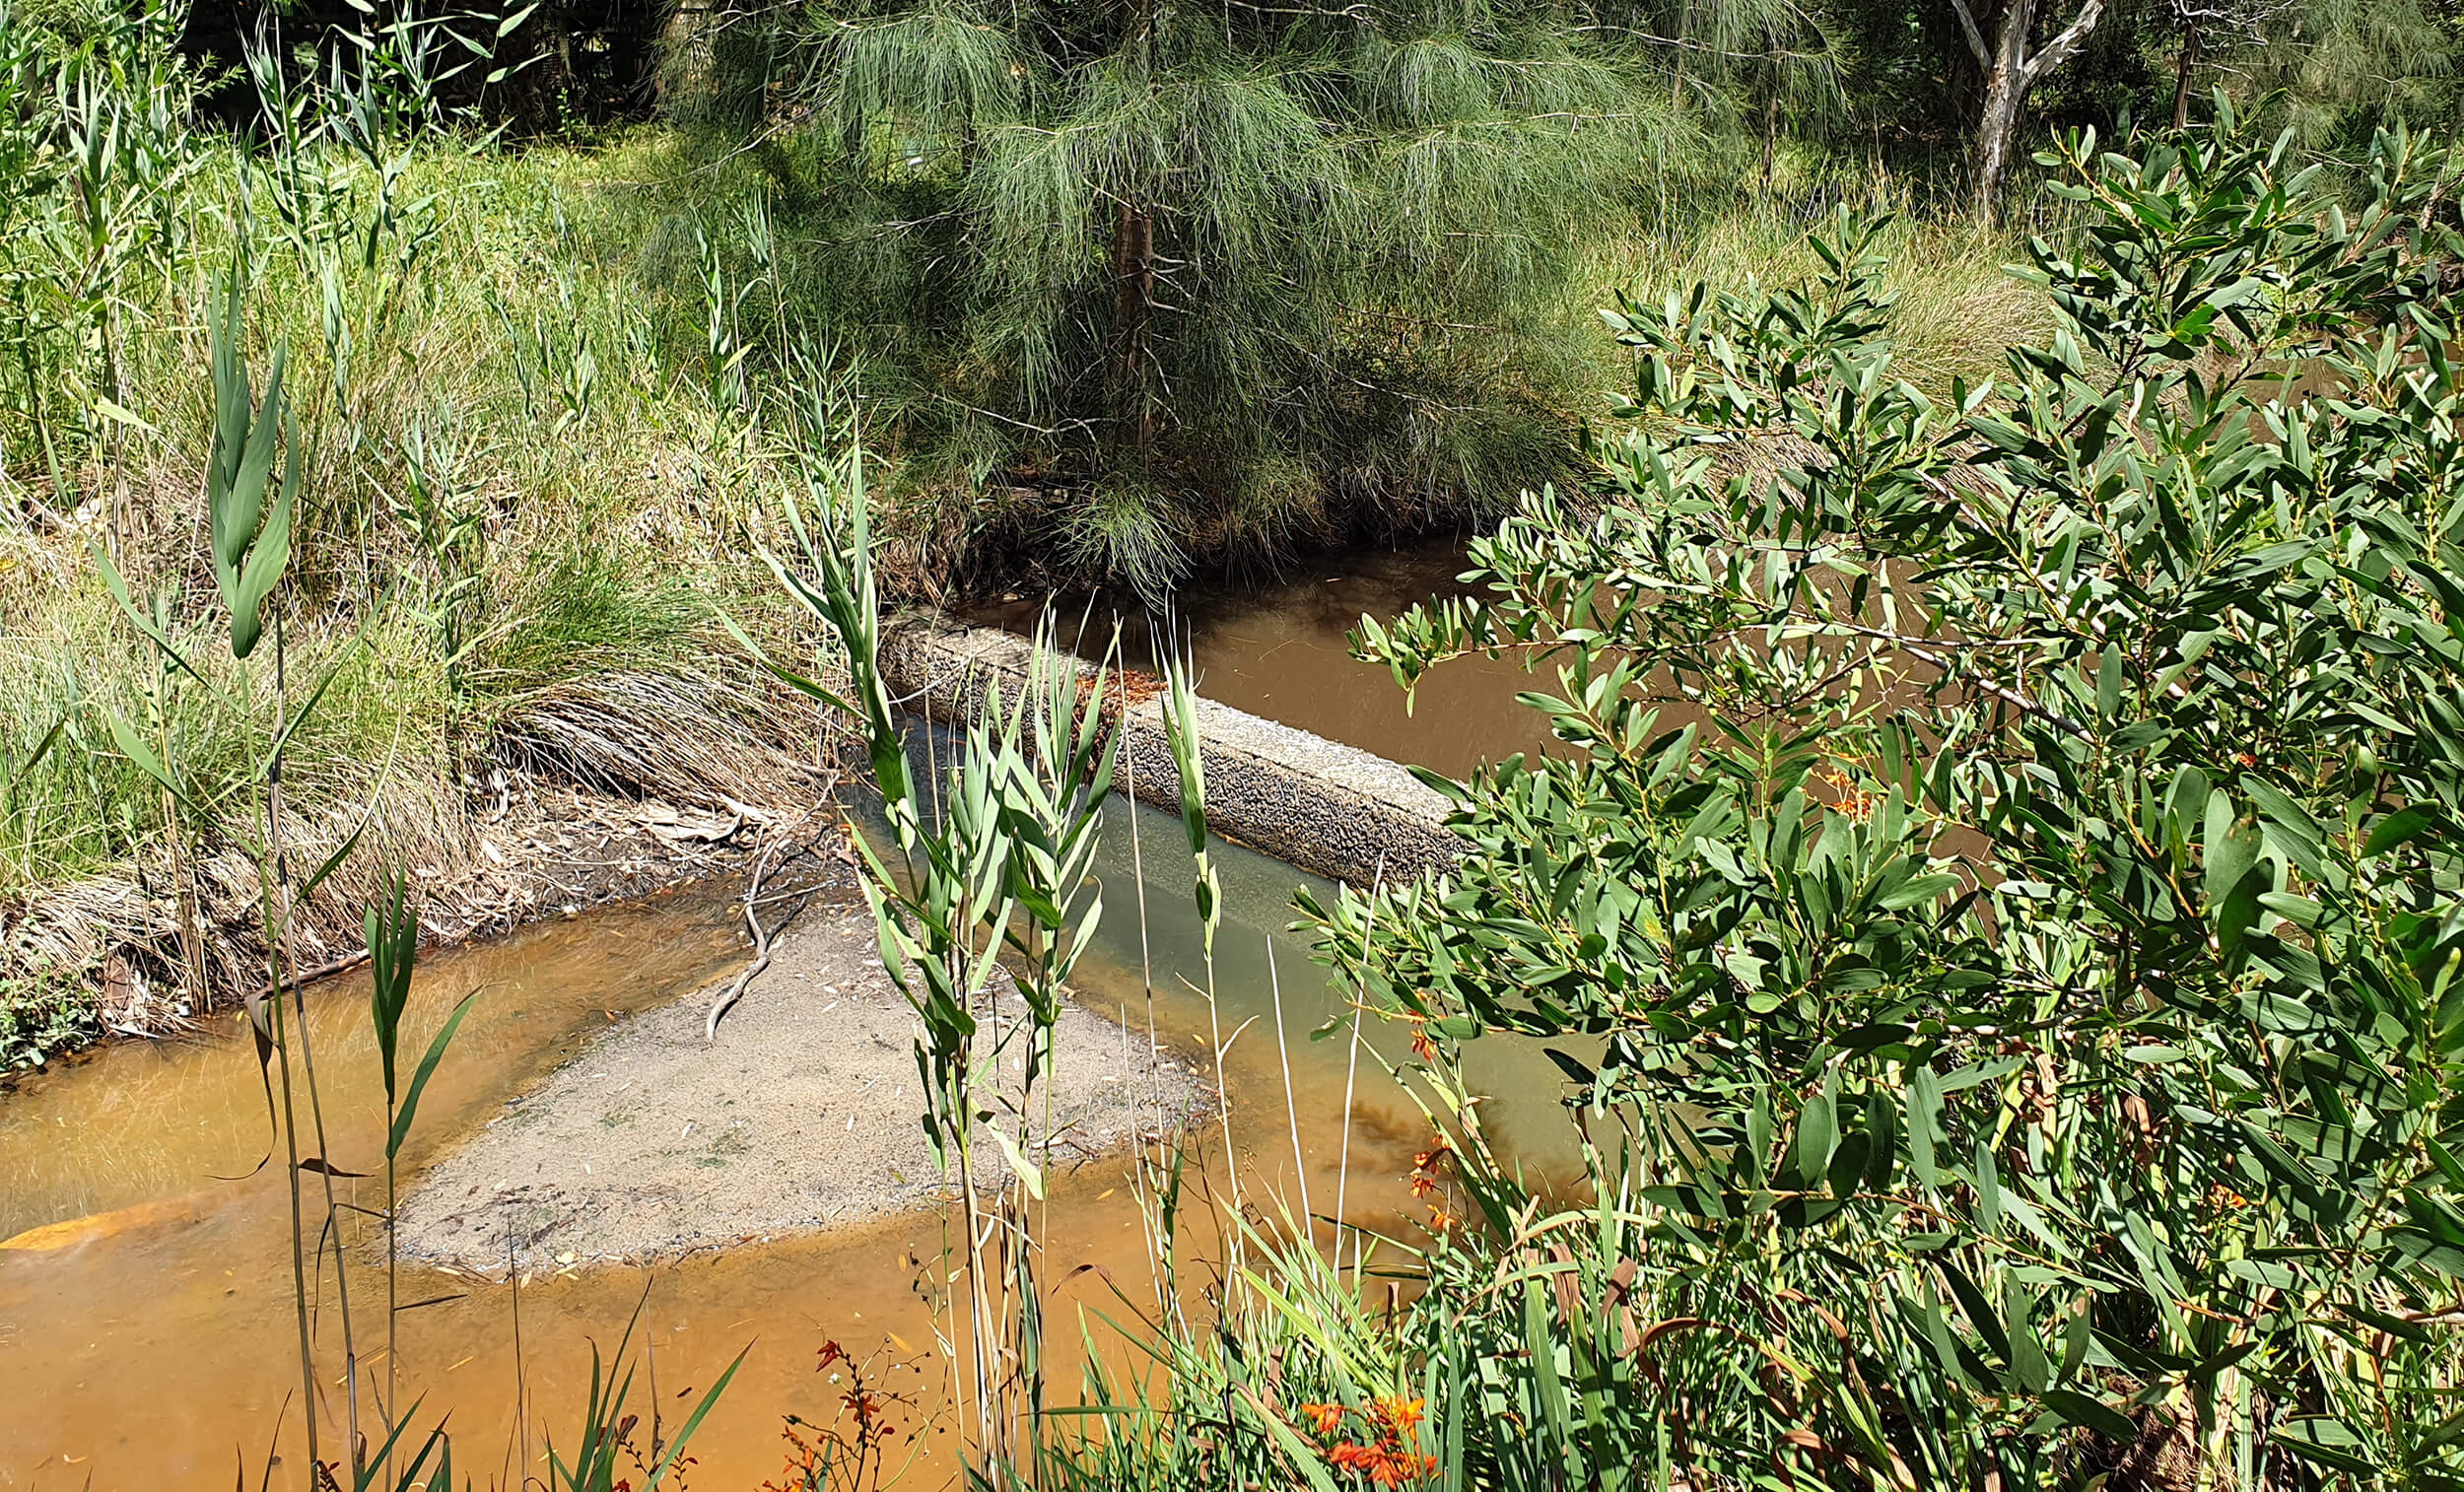 Photograph of sediment build up in a creek